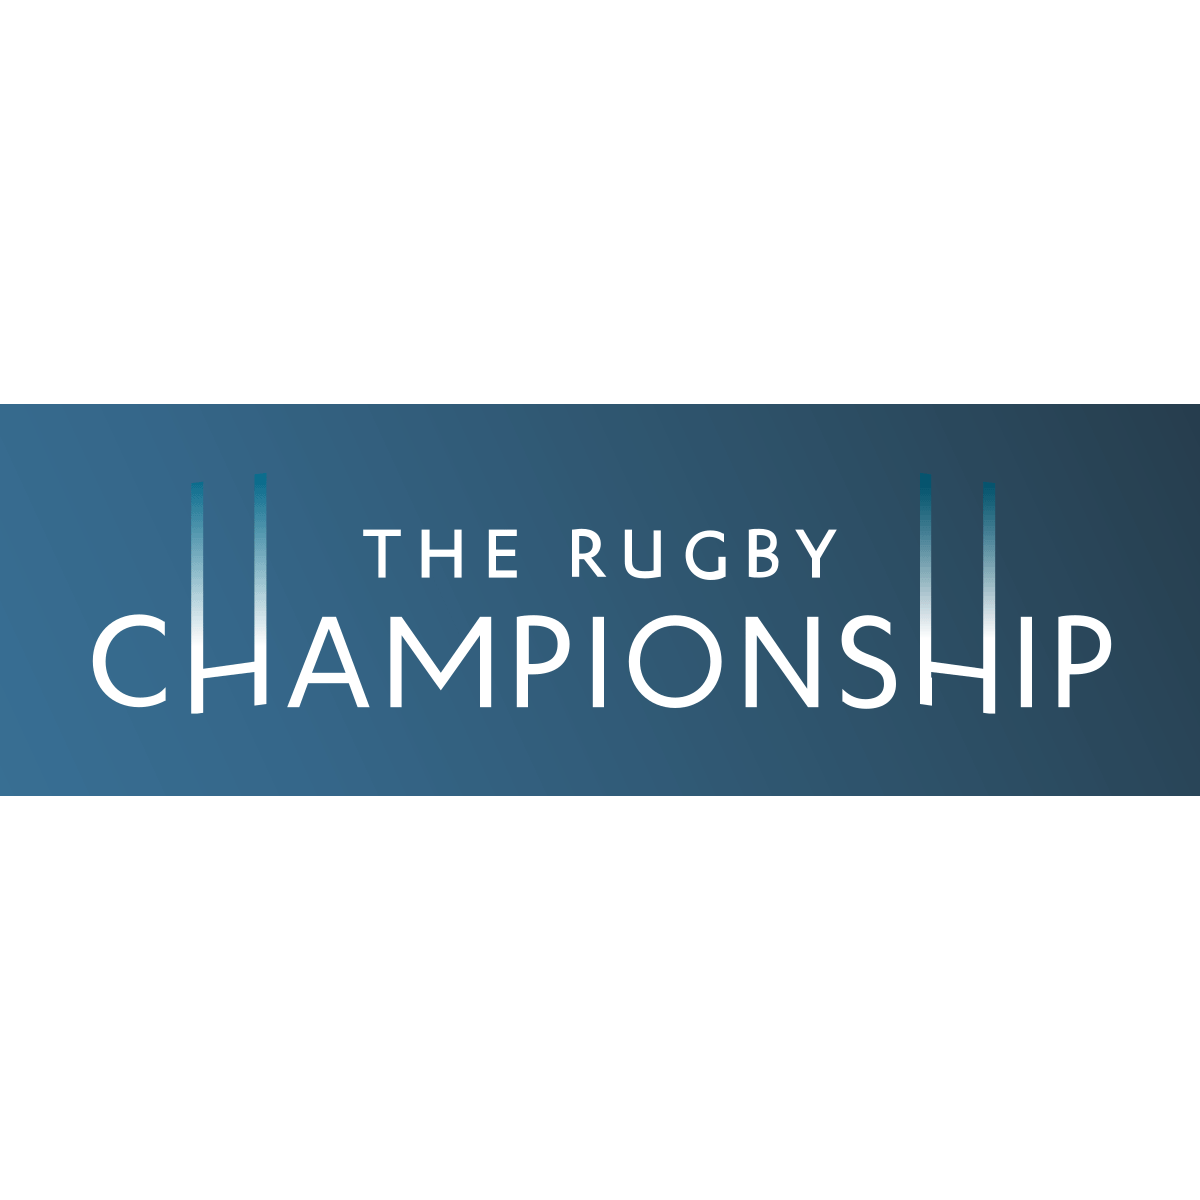 RUGBY CHAMPIONSHIP